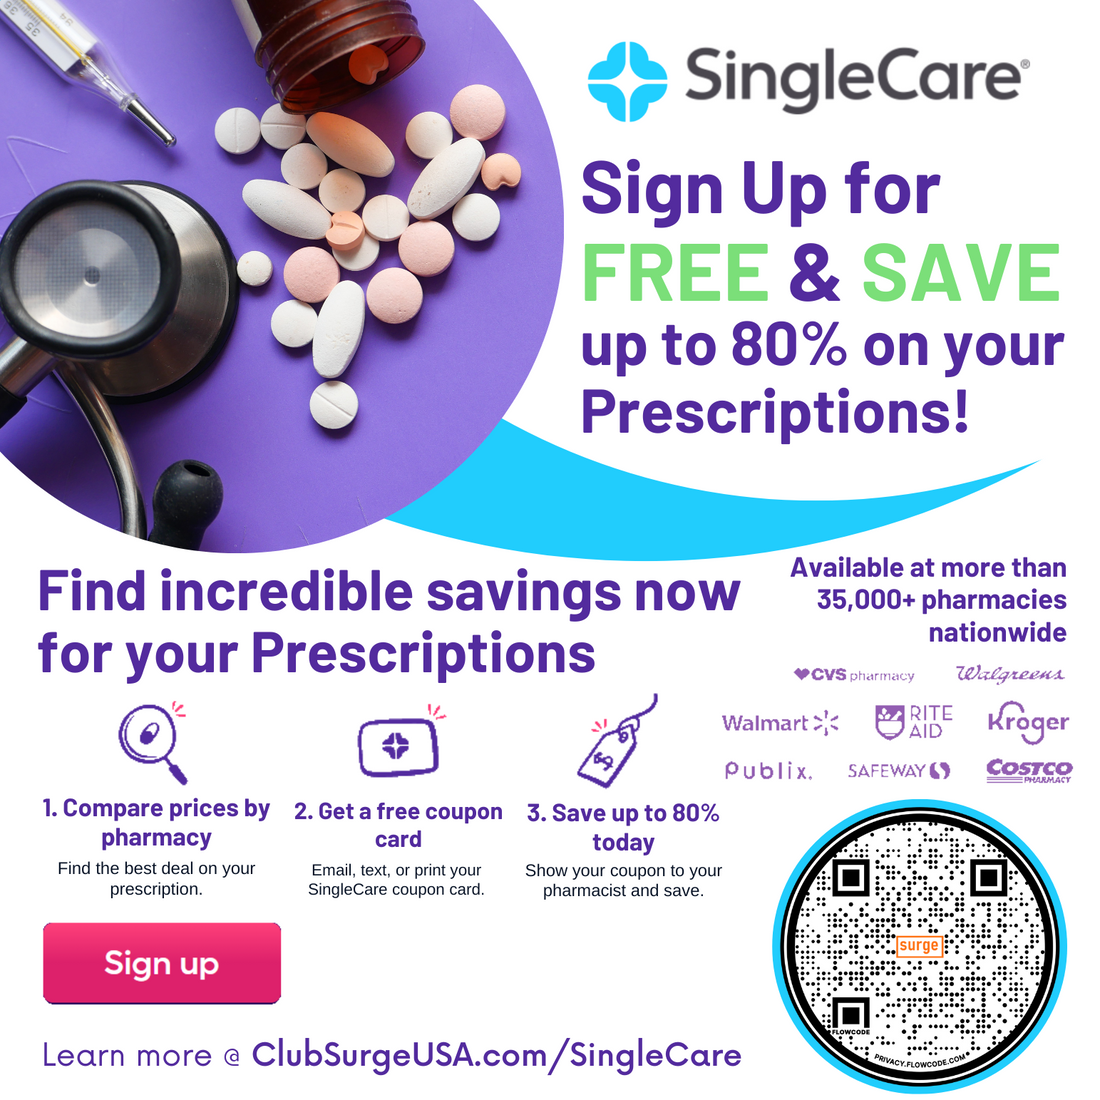 SingleCare - Sign Up for FREE & SAVE up to 80% on your Prescriptions!